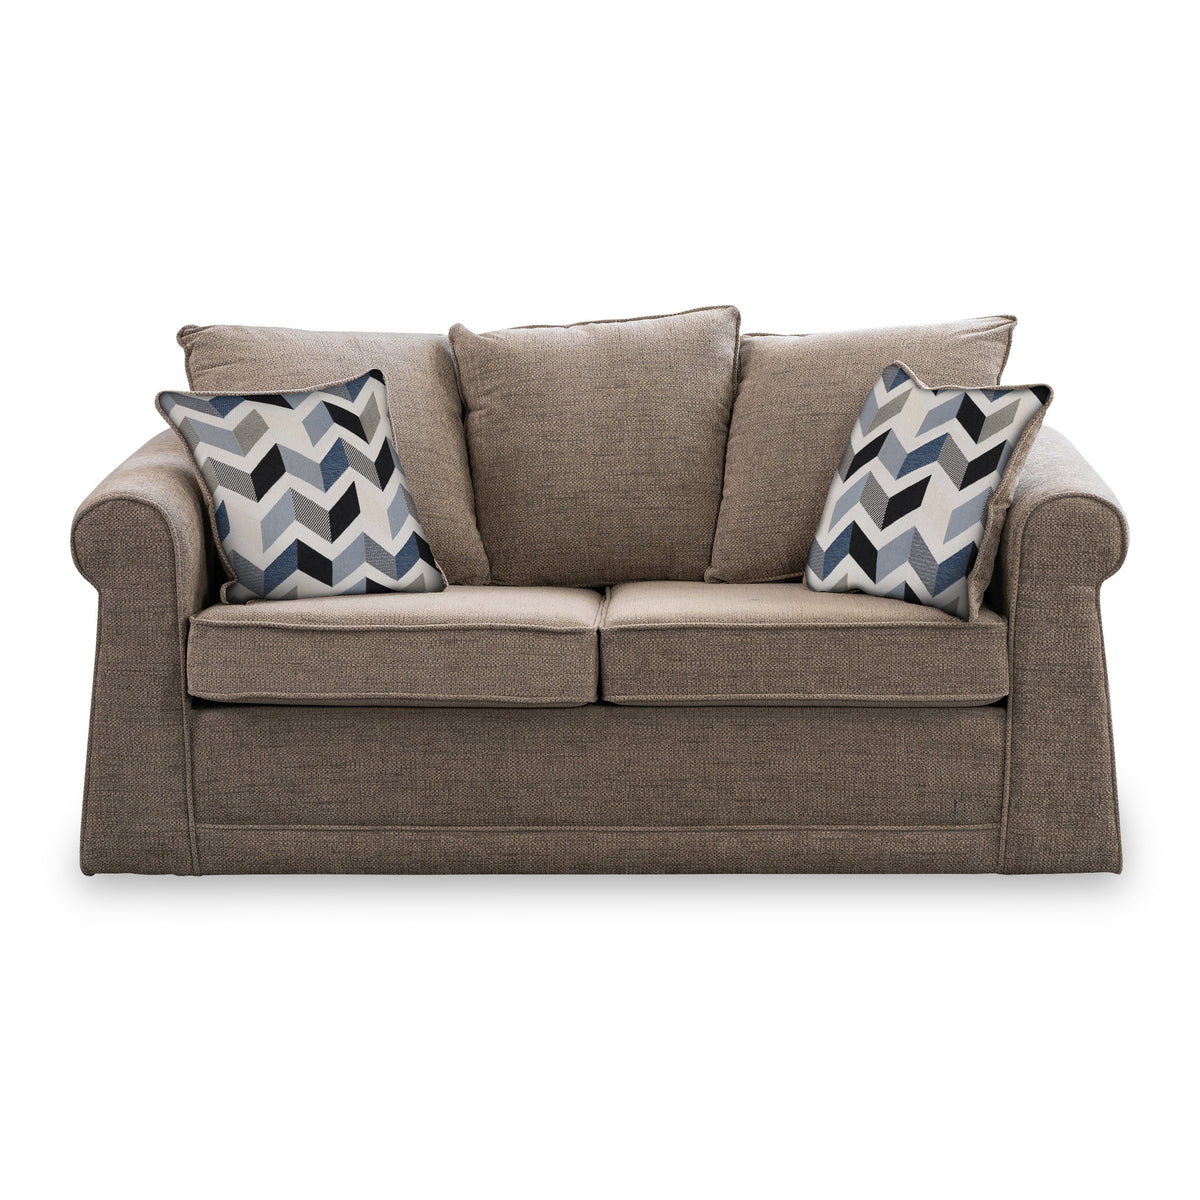 Branston Fawn Soft Weave 2 Seater Sofabed with Denim Scatter Cushions from Roseland Furniture